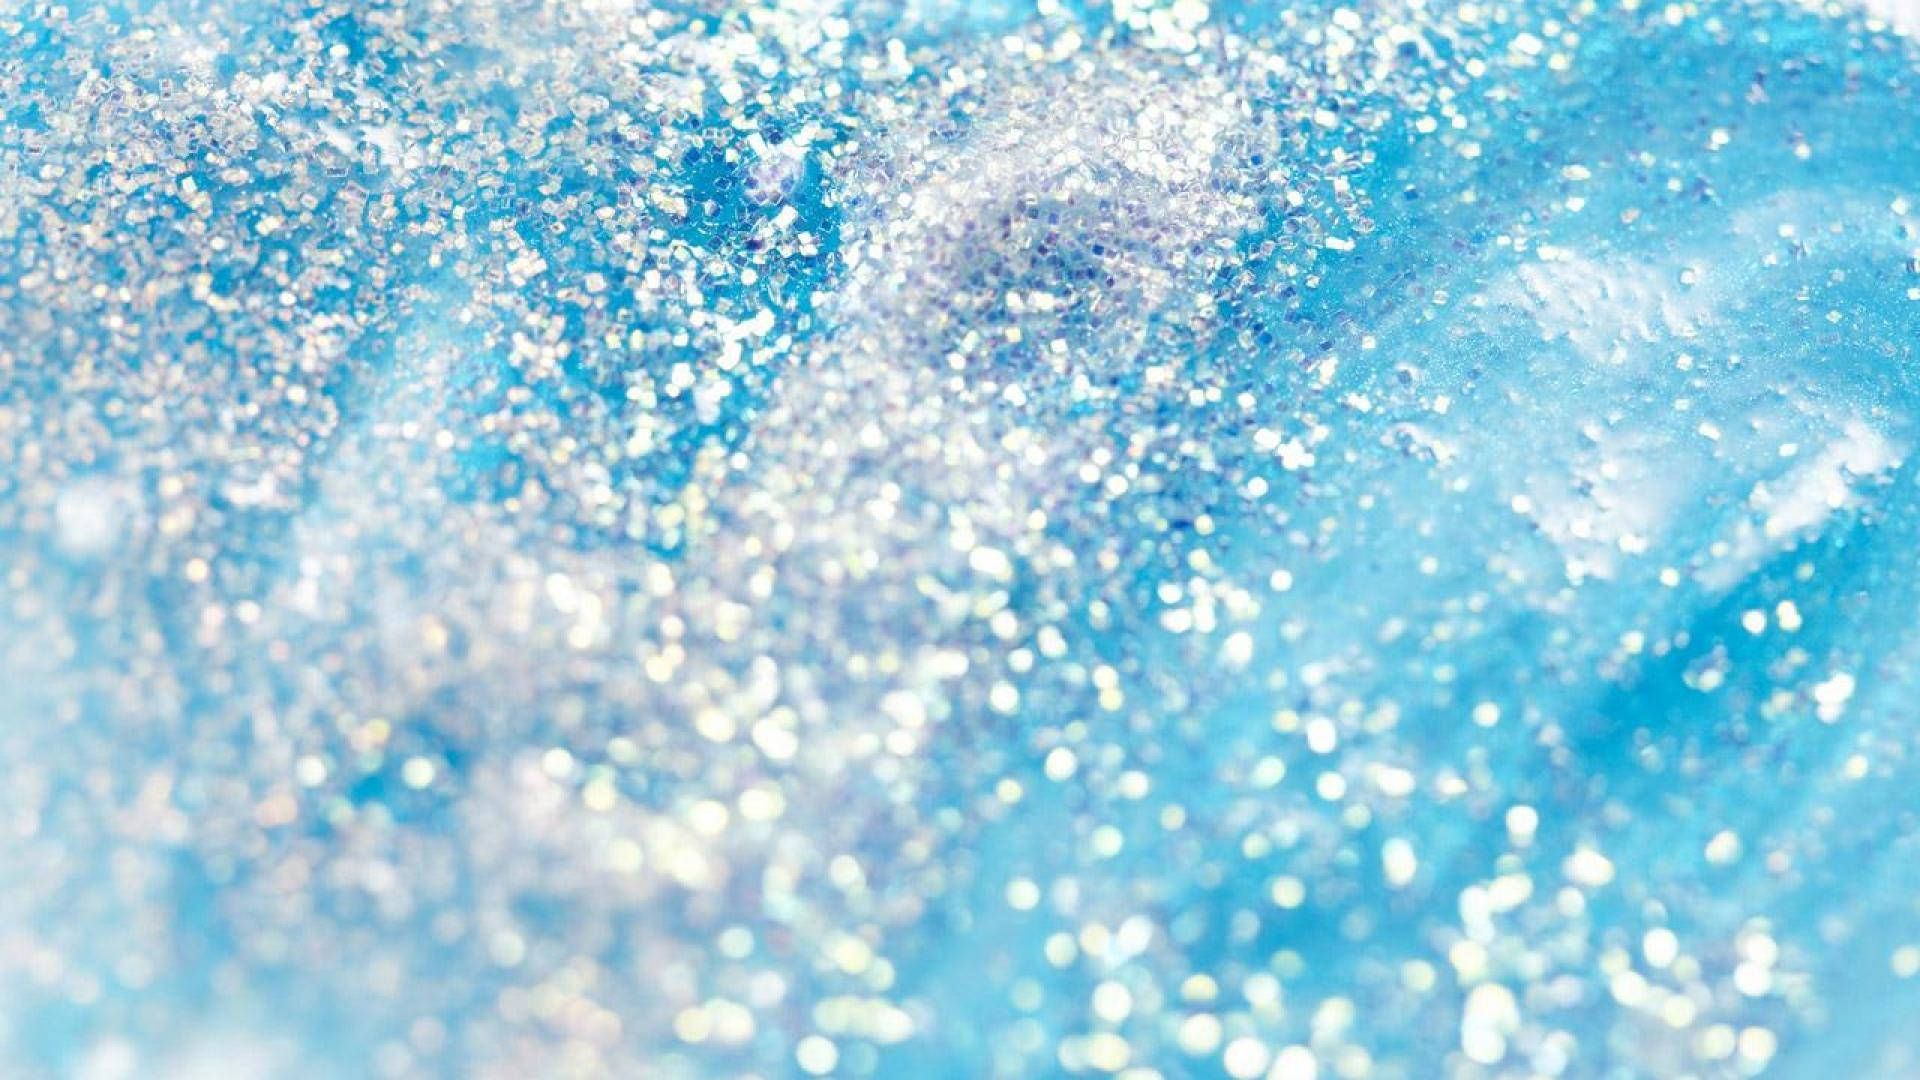 Download Sparkly Silver Glitters On Blue Slime Wallpaper